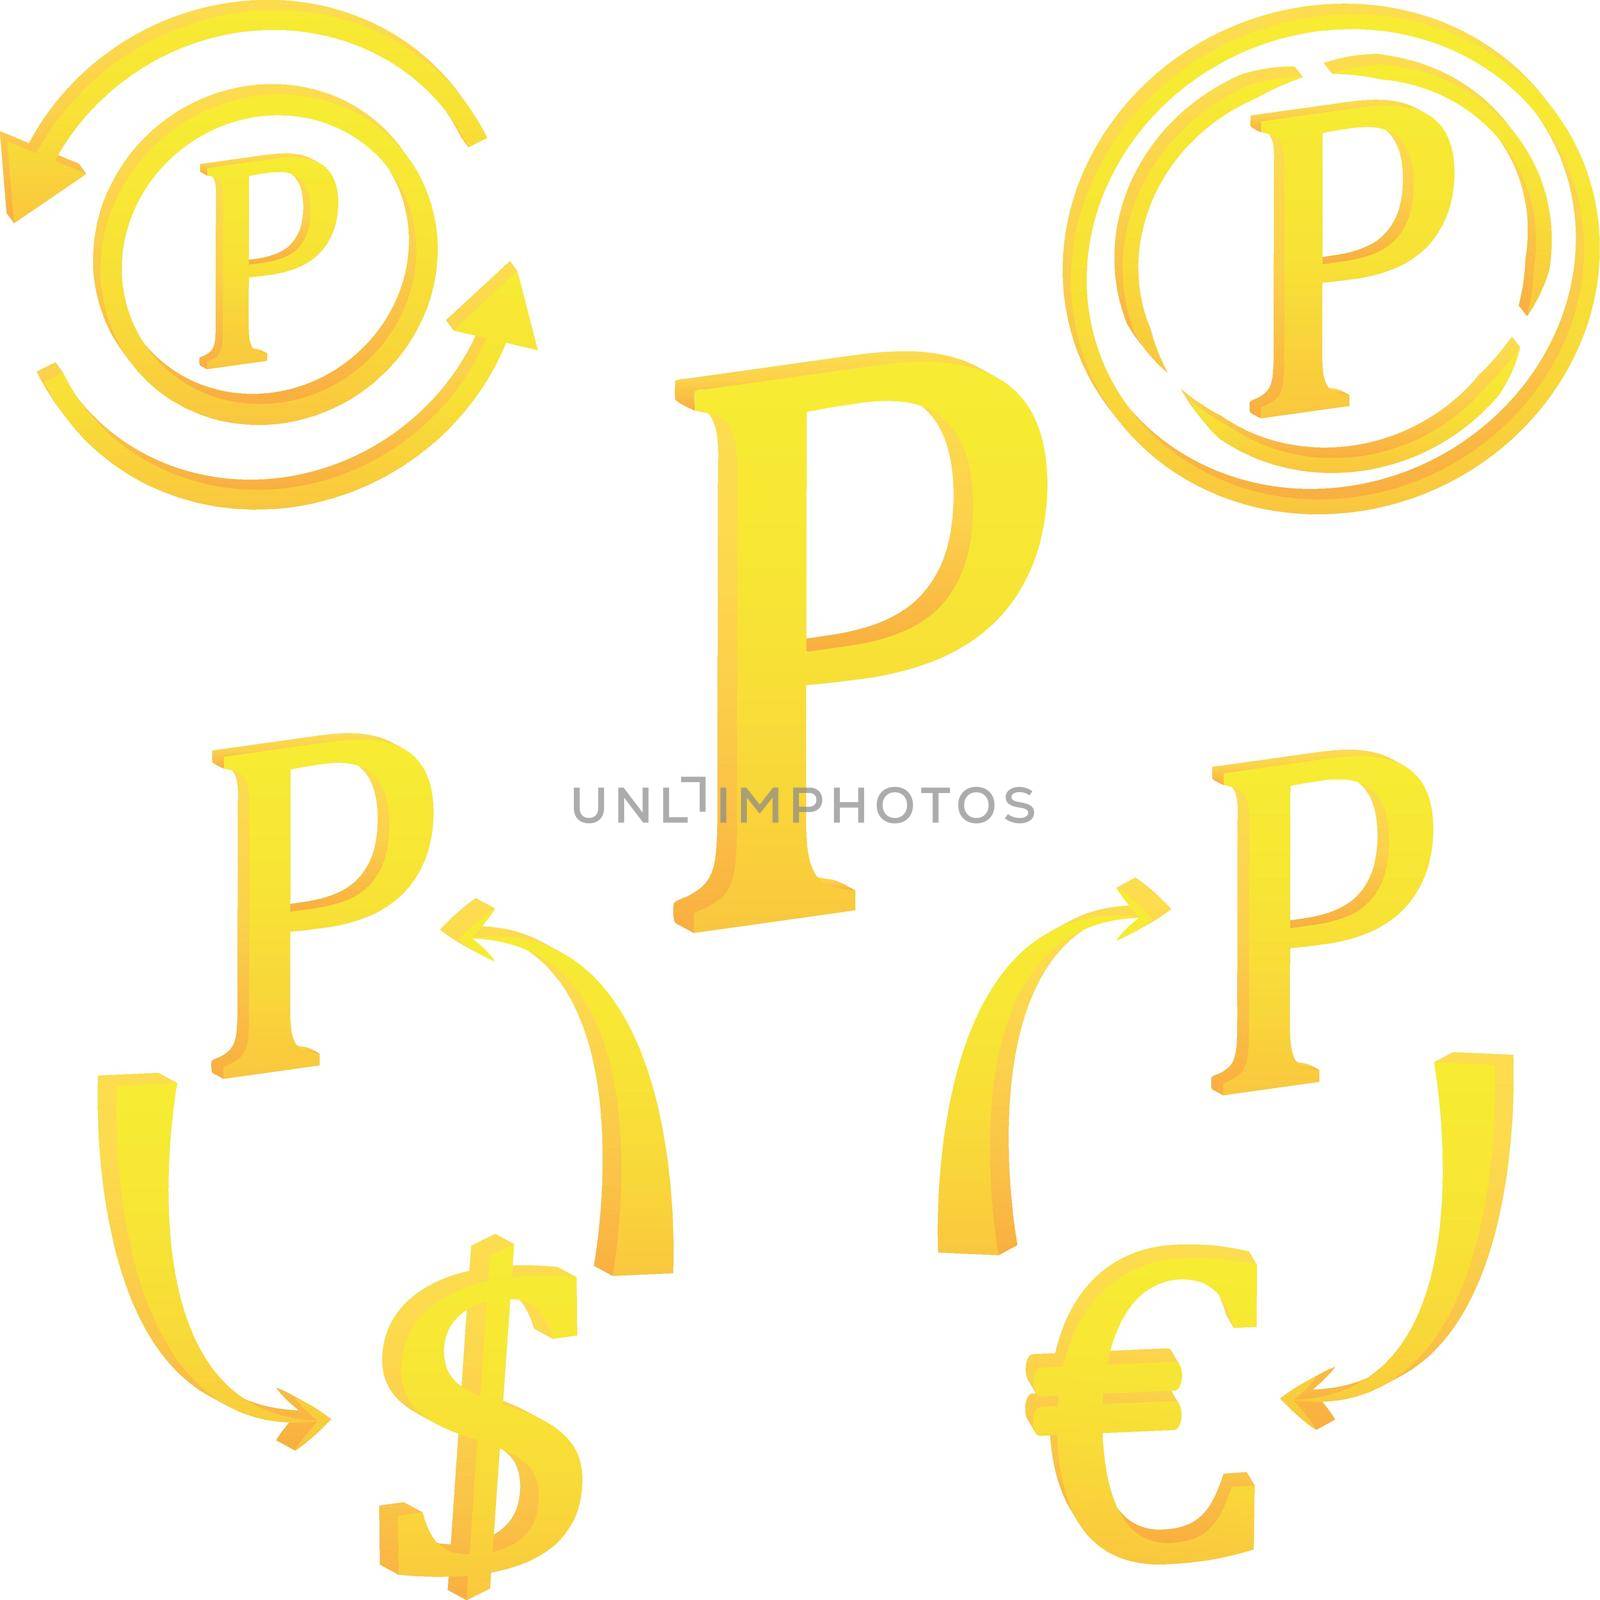 Botswana Pula currency symbol icon striped vector illustration by Olena758